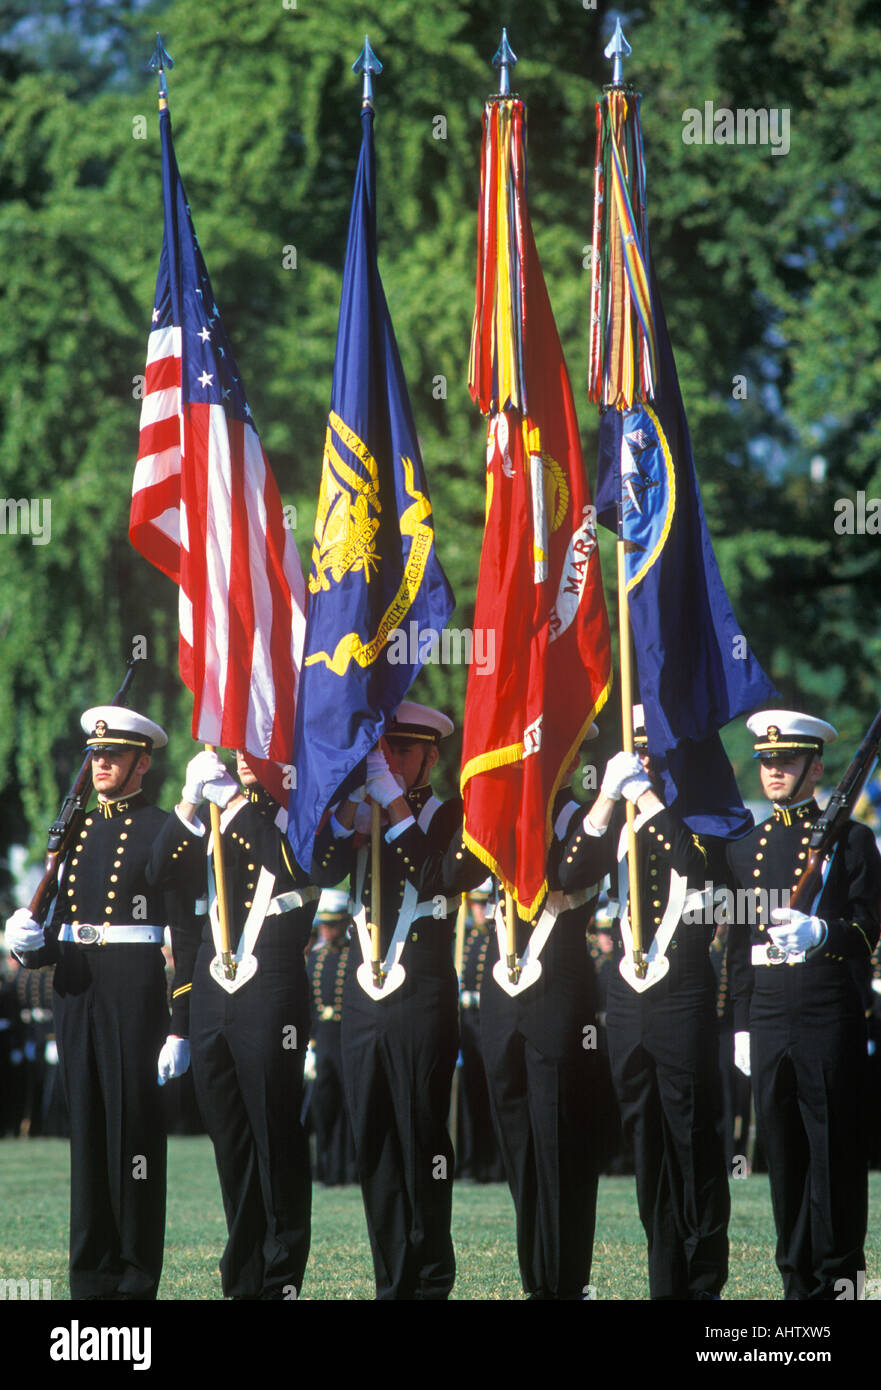 Midshipmen Color Guard United States Naval Academy Annapolis Maryland Stock Photo